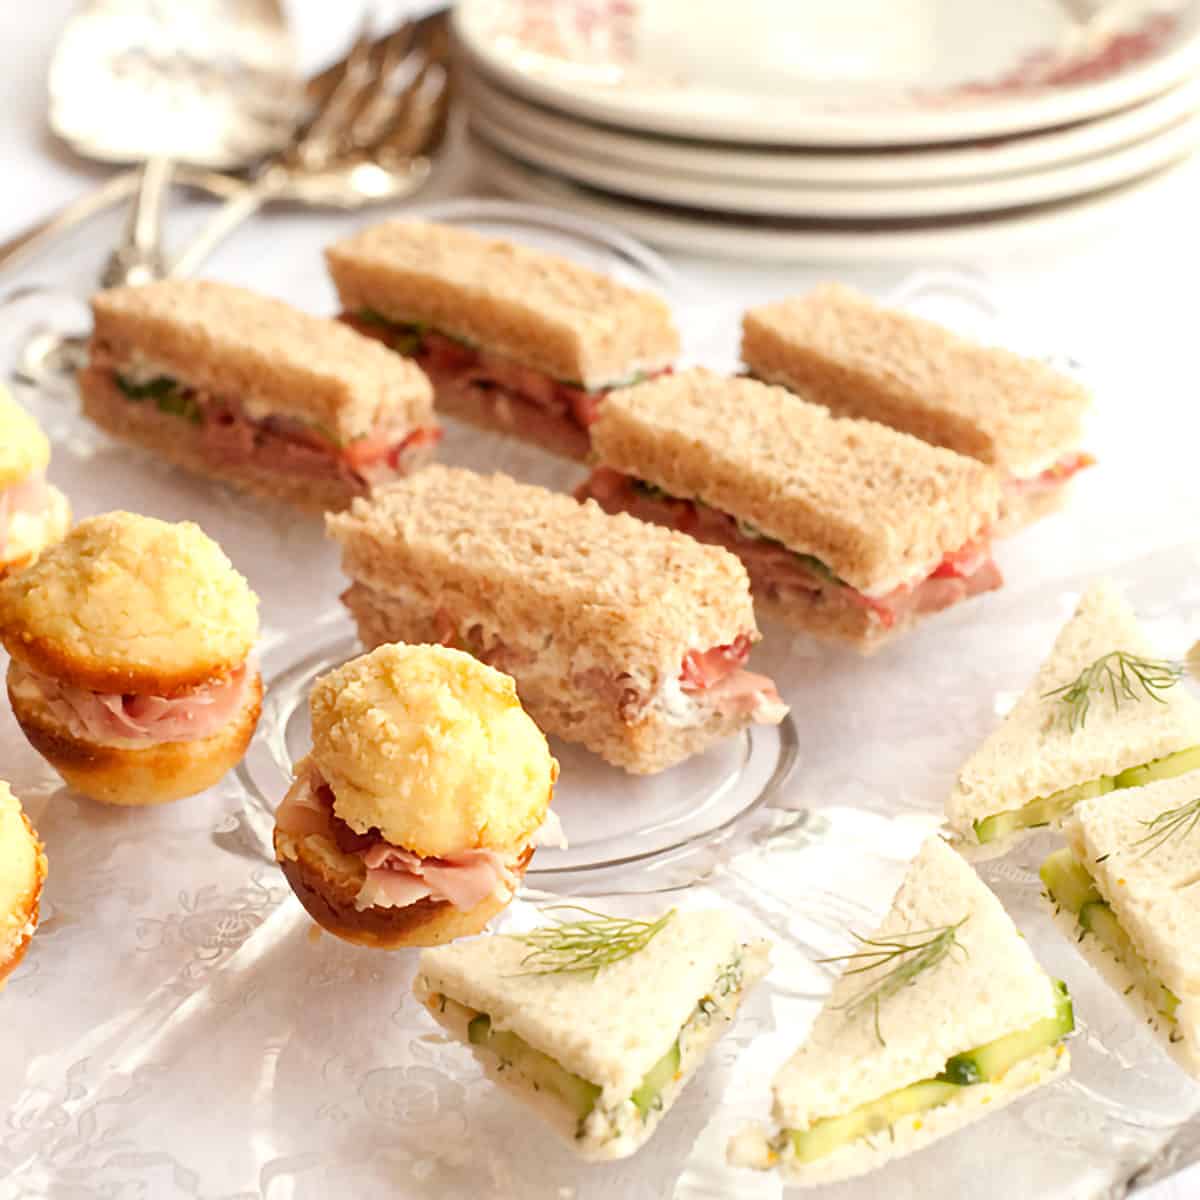 Three types of tea sandwiches on a glass tray.